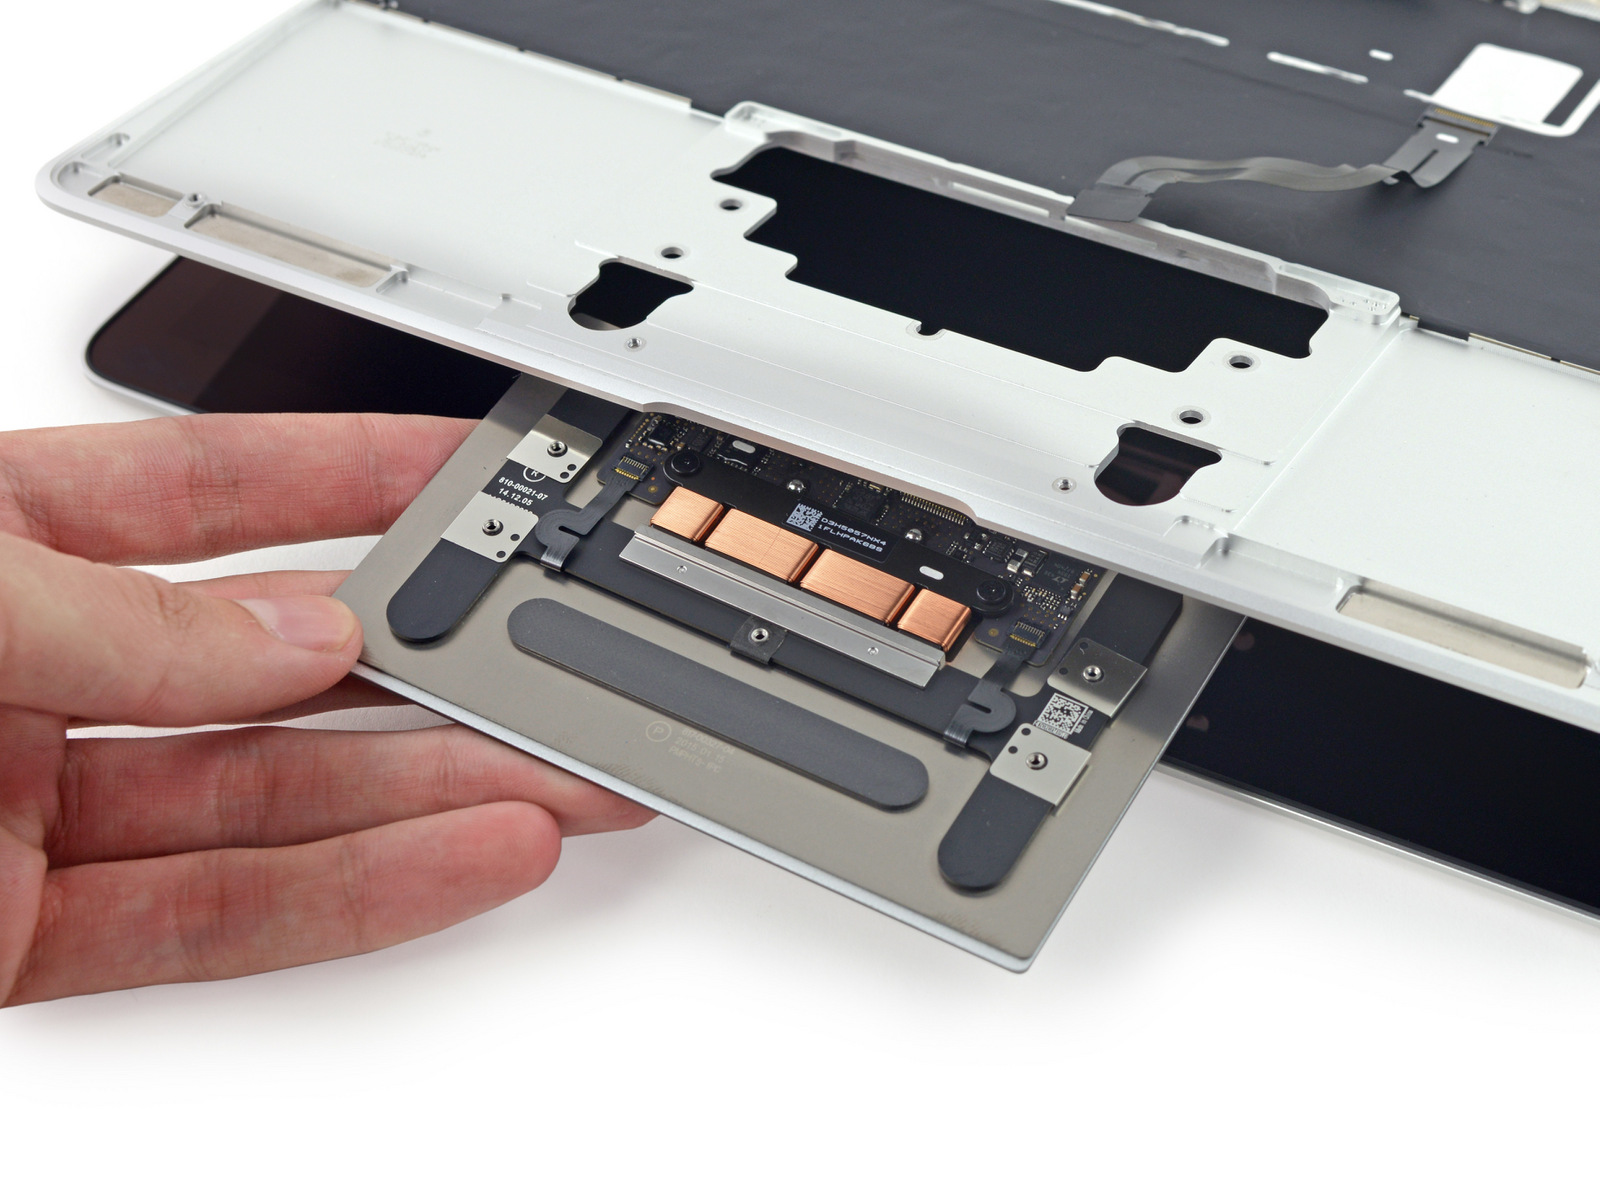 replacement ram chip for a mid 2012 mac book pro